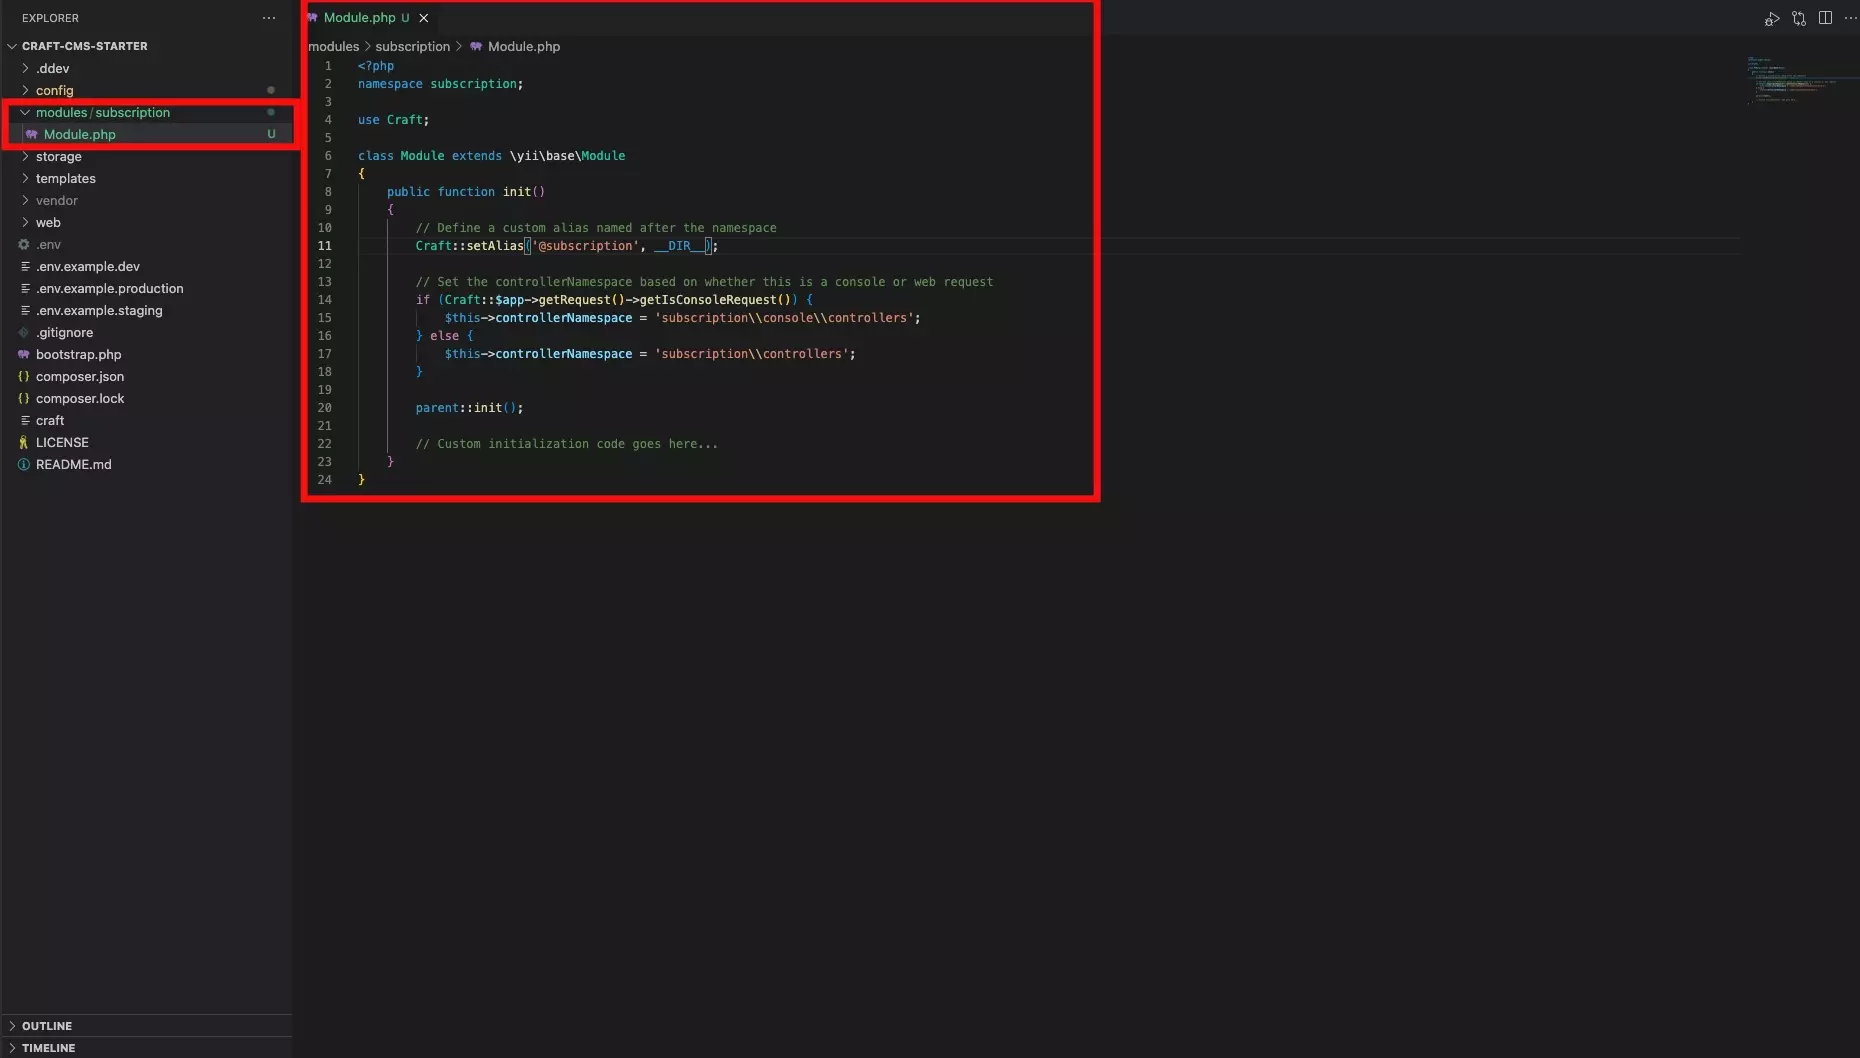 A screenshot of VSCode with our Module and module folder structure.